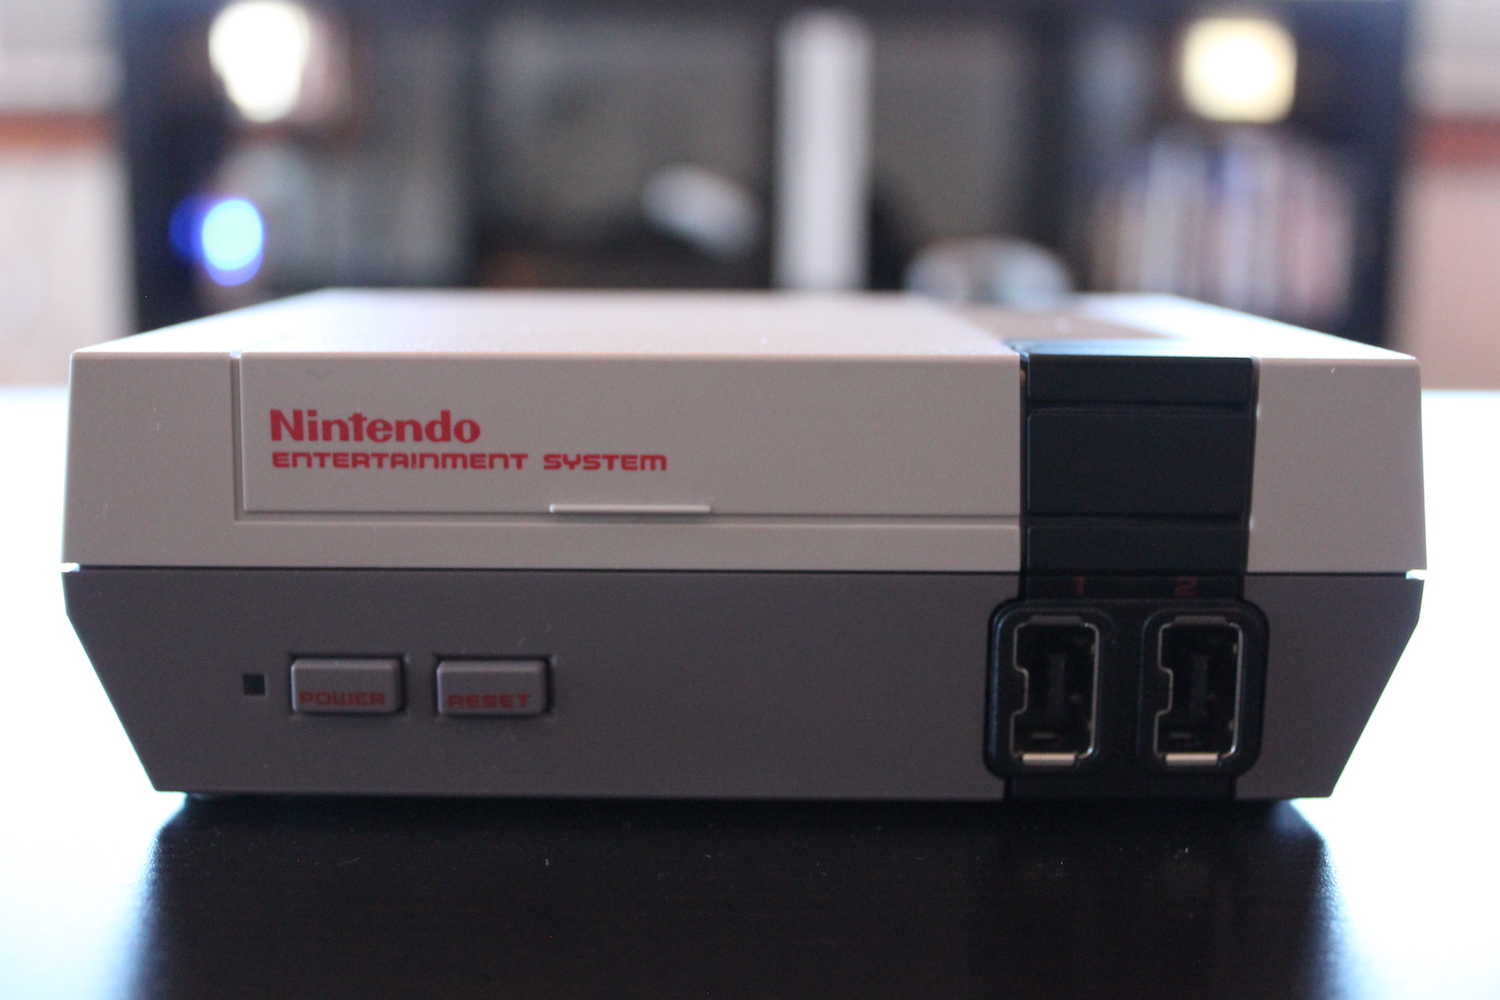 is the nes classic with 500 games licensed by nintendo